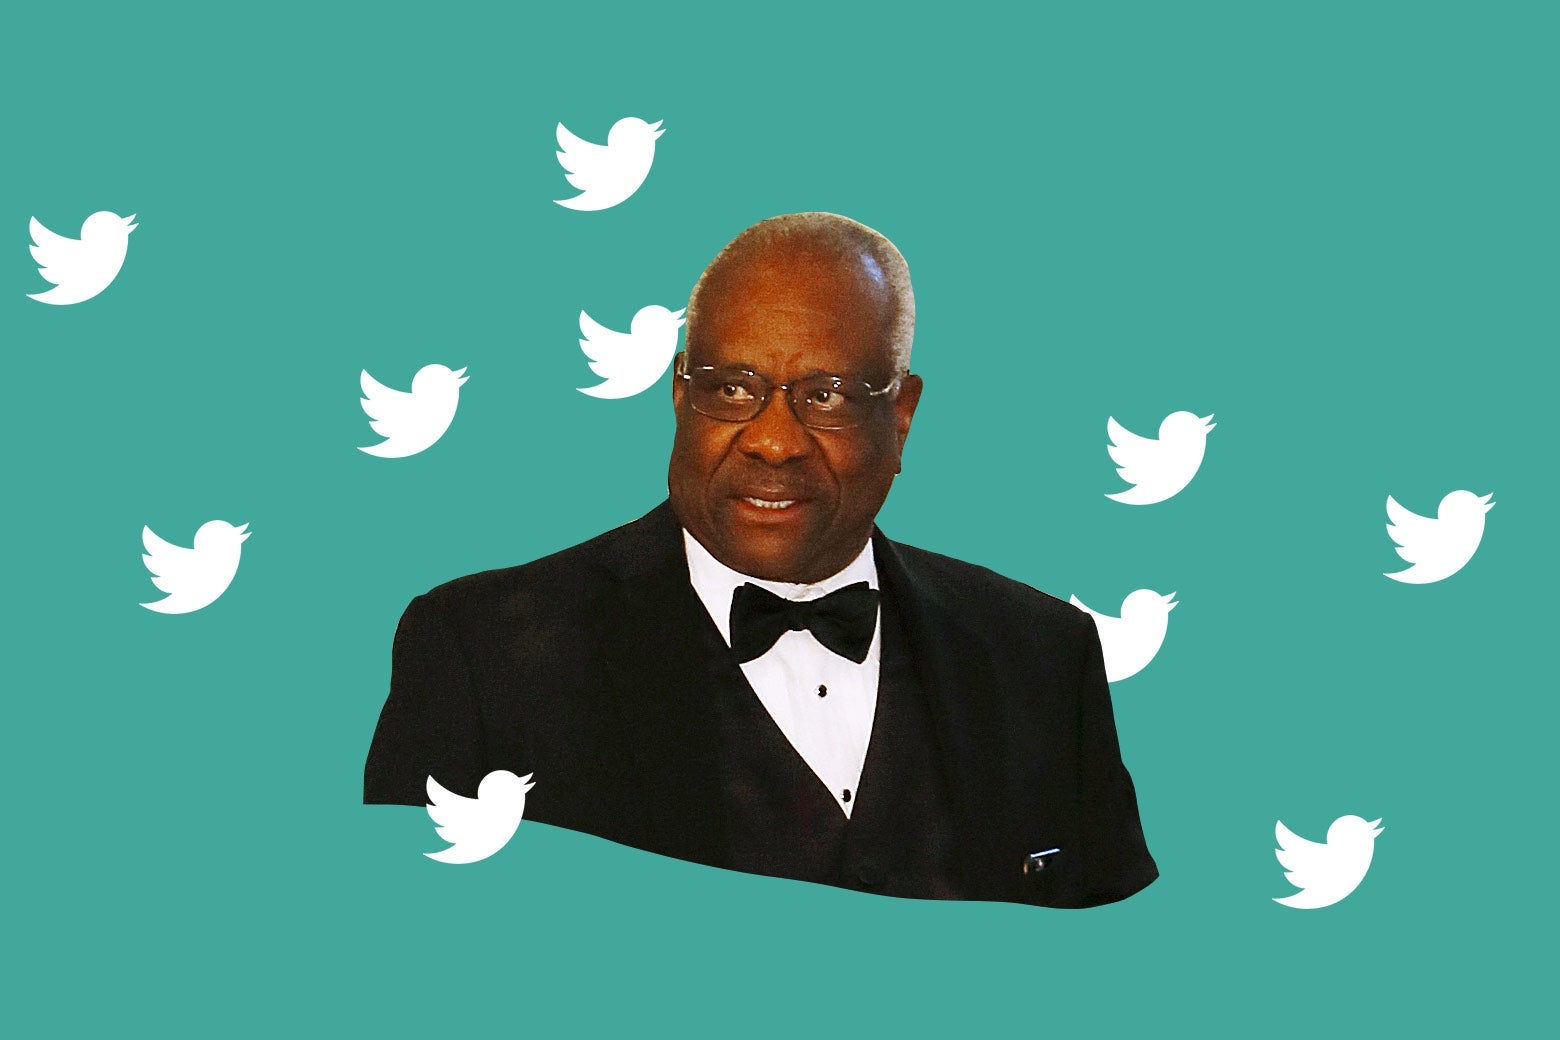 Collage of Clarence Thomas wearing a tux, surrounded by Twitter birds